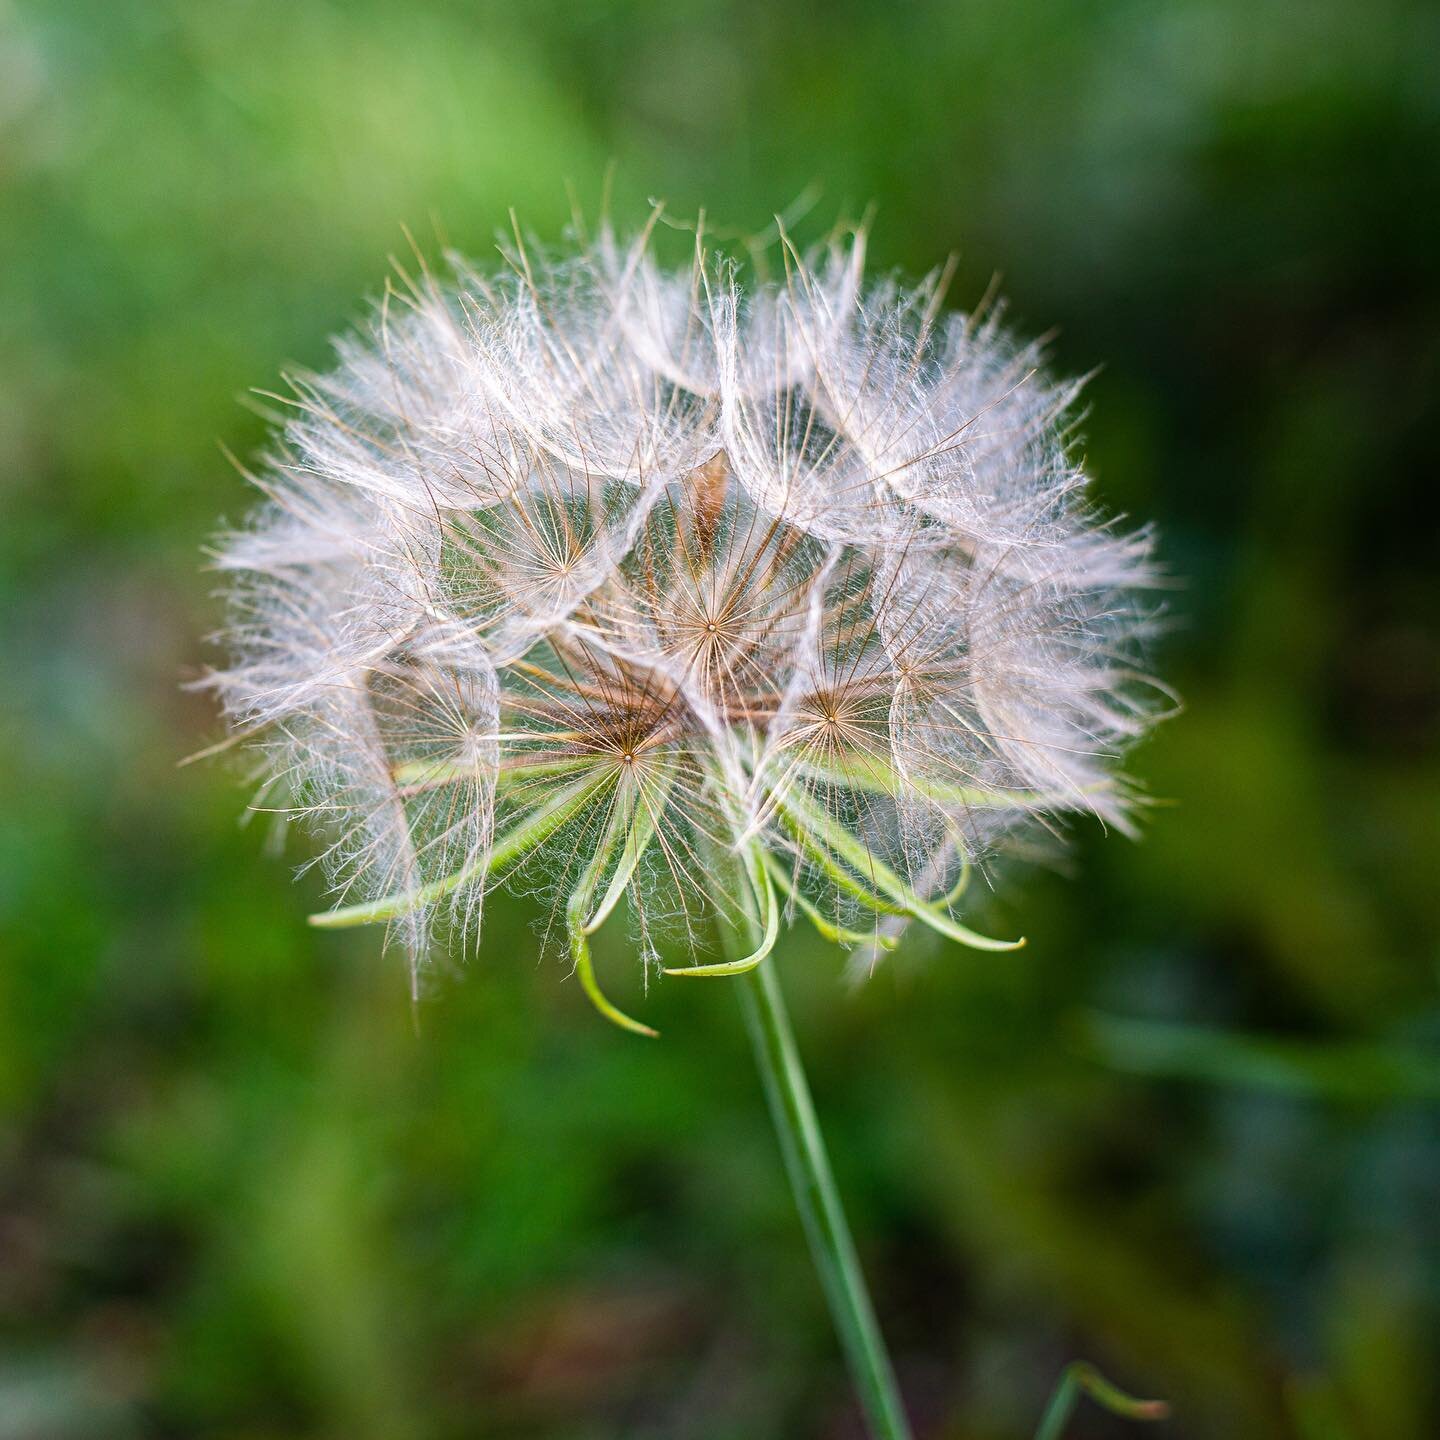 &ldquo;Dandelions don&rsquo;t know whether their a weed of a brilliance.&rdquo; adrienne maree brown